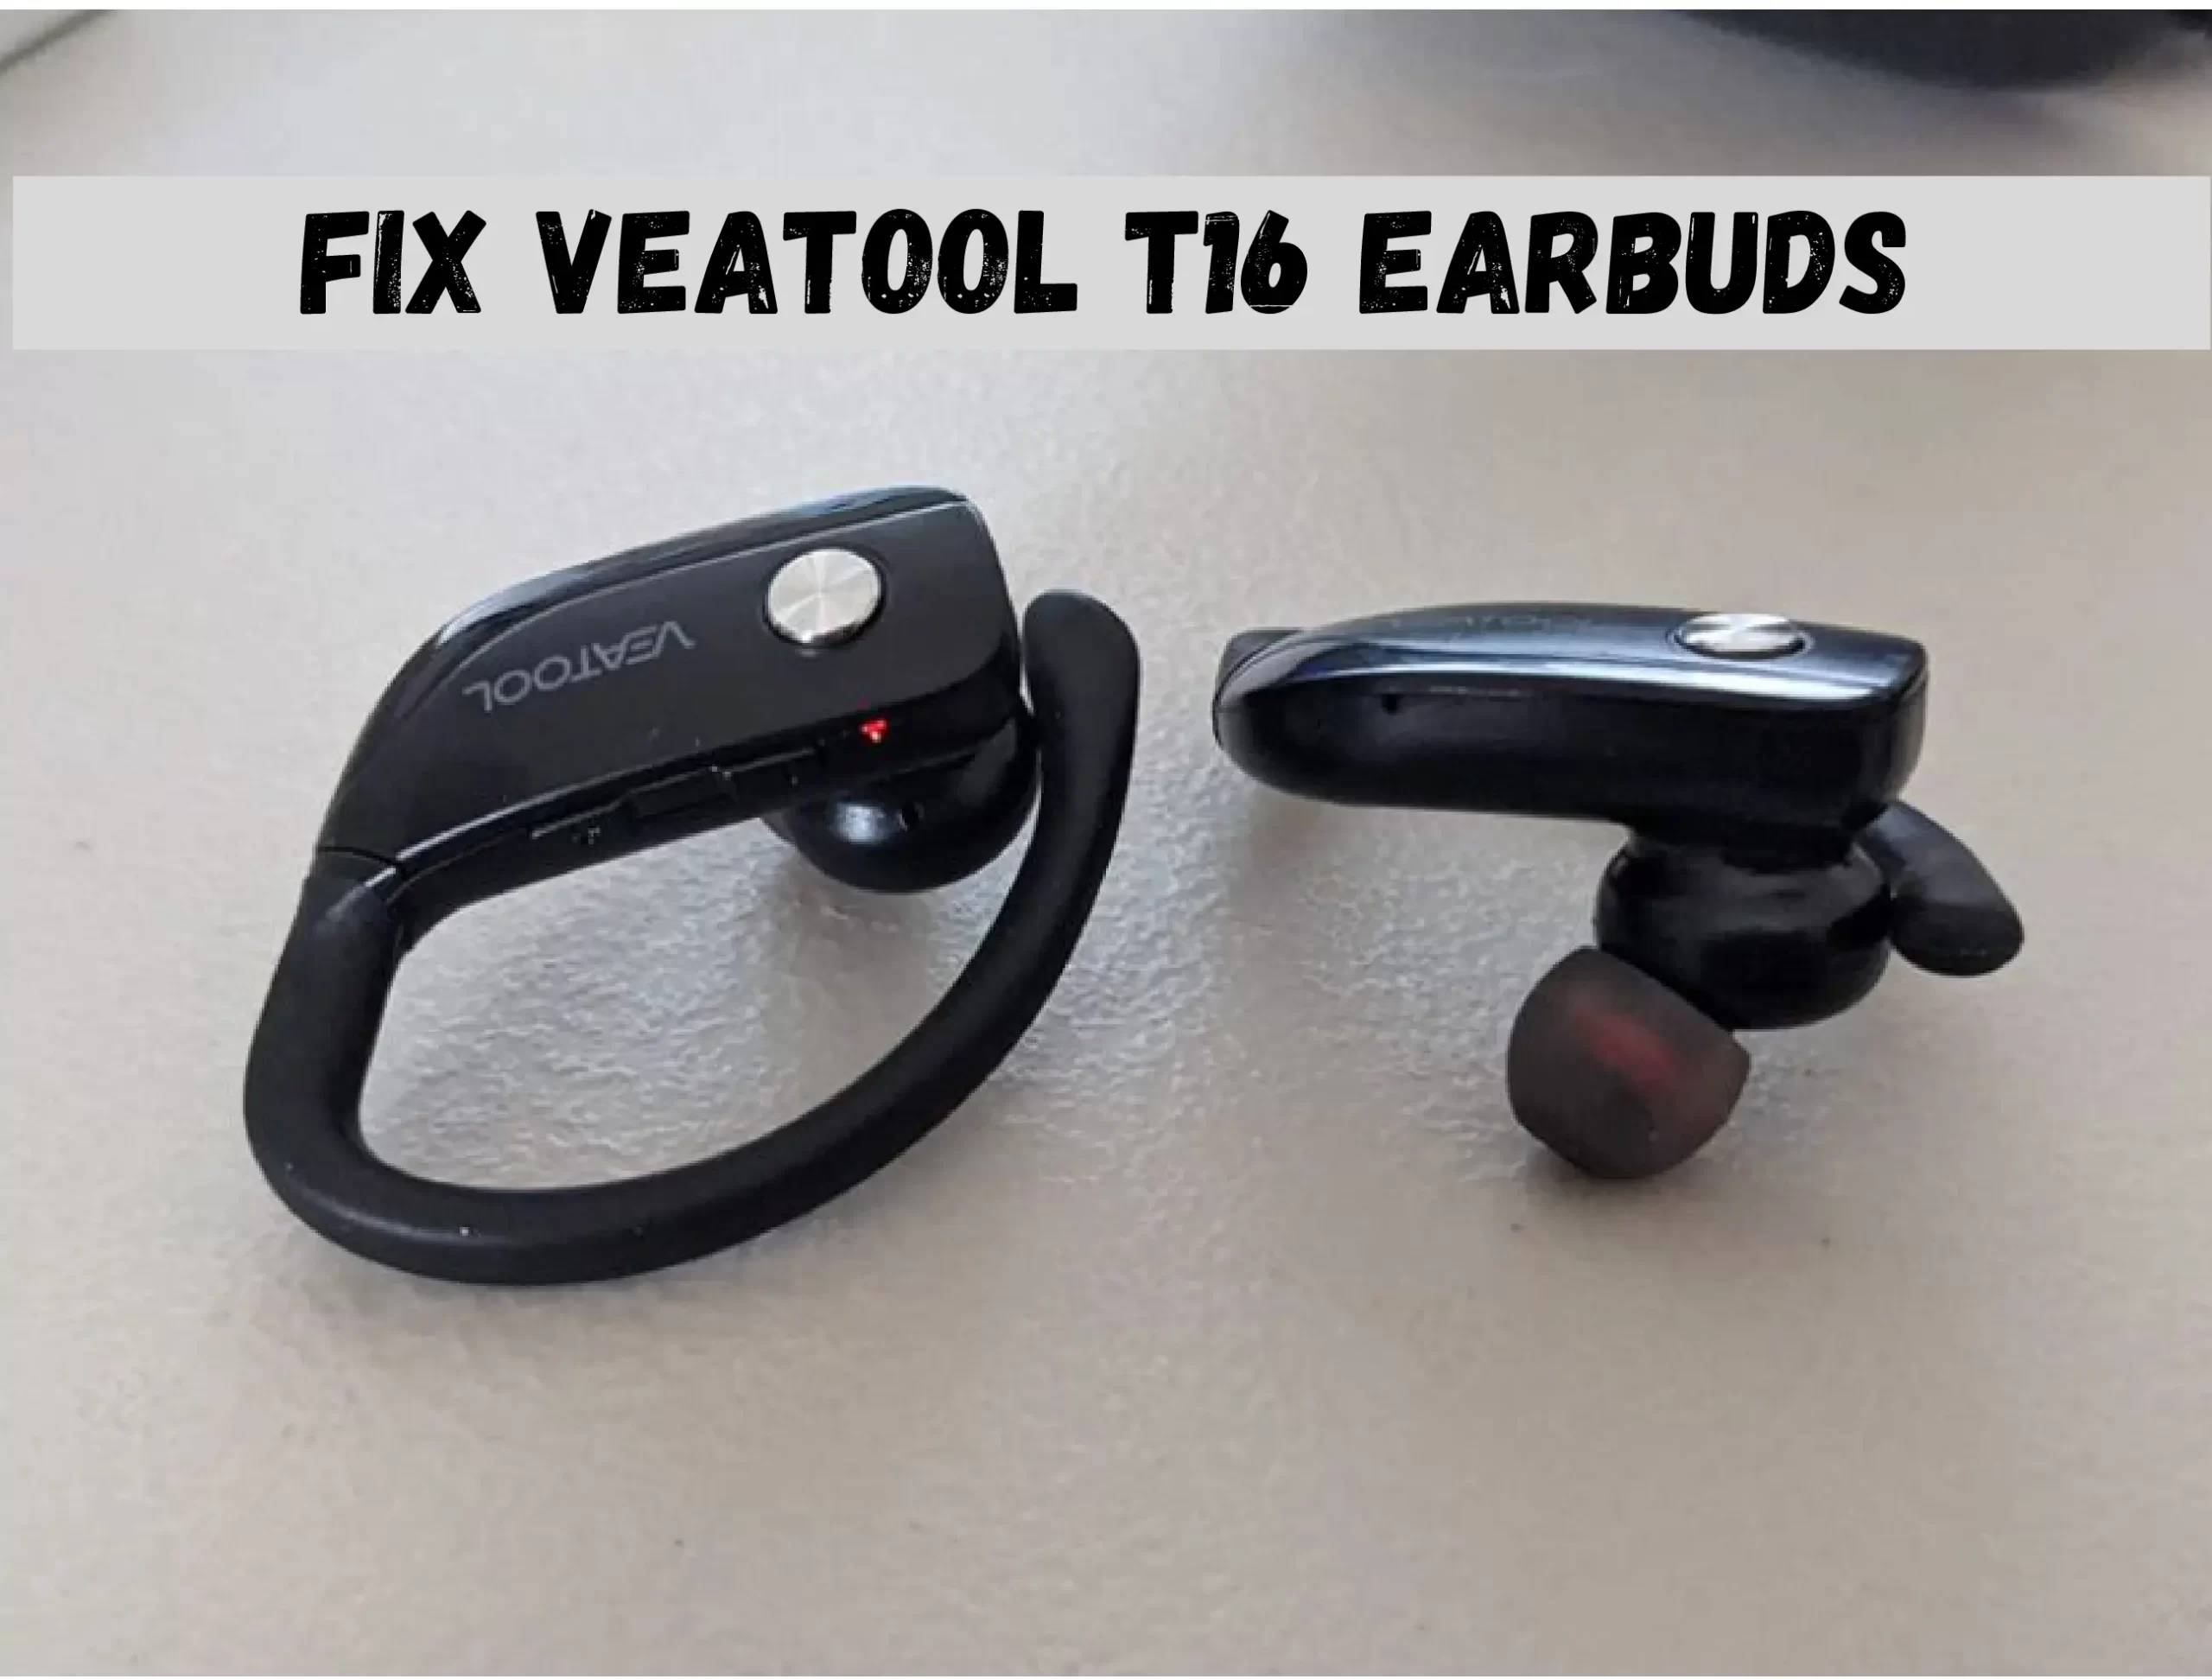 Veatool T16 Earbuds One Side Not Working